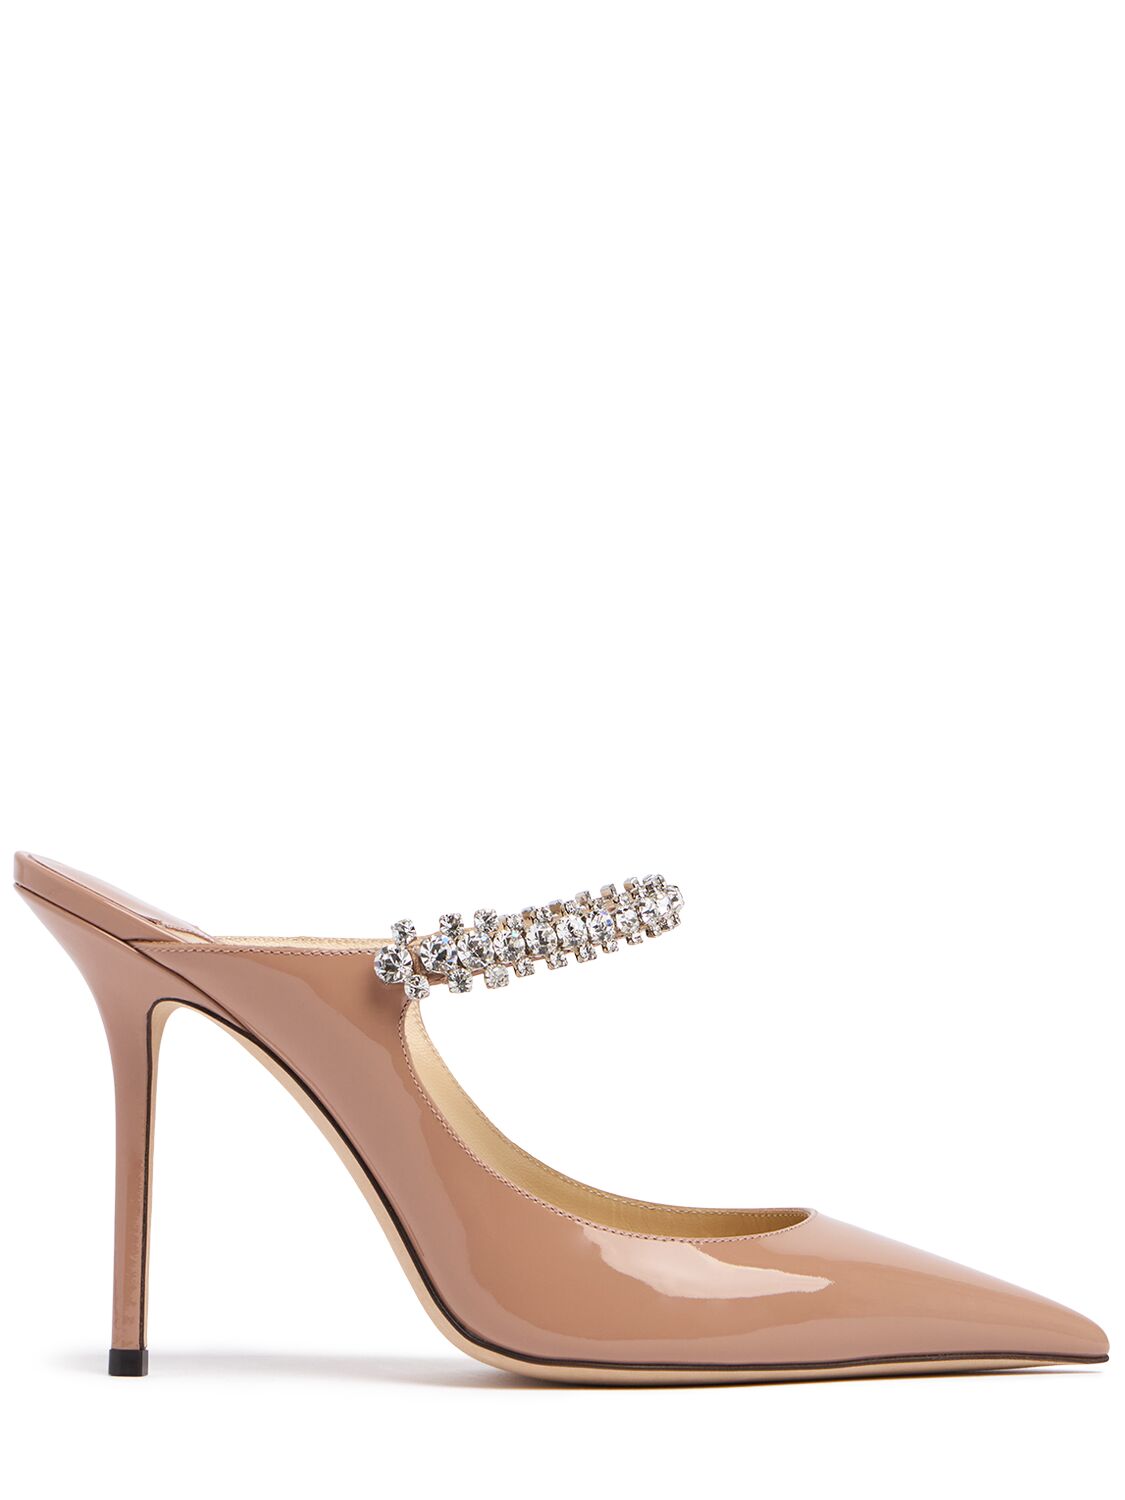 Jimmy Choo 100mm Bing Patent Leather Mules In Nude